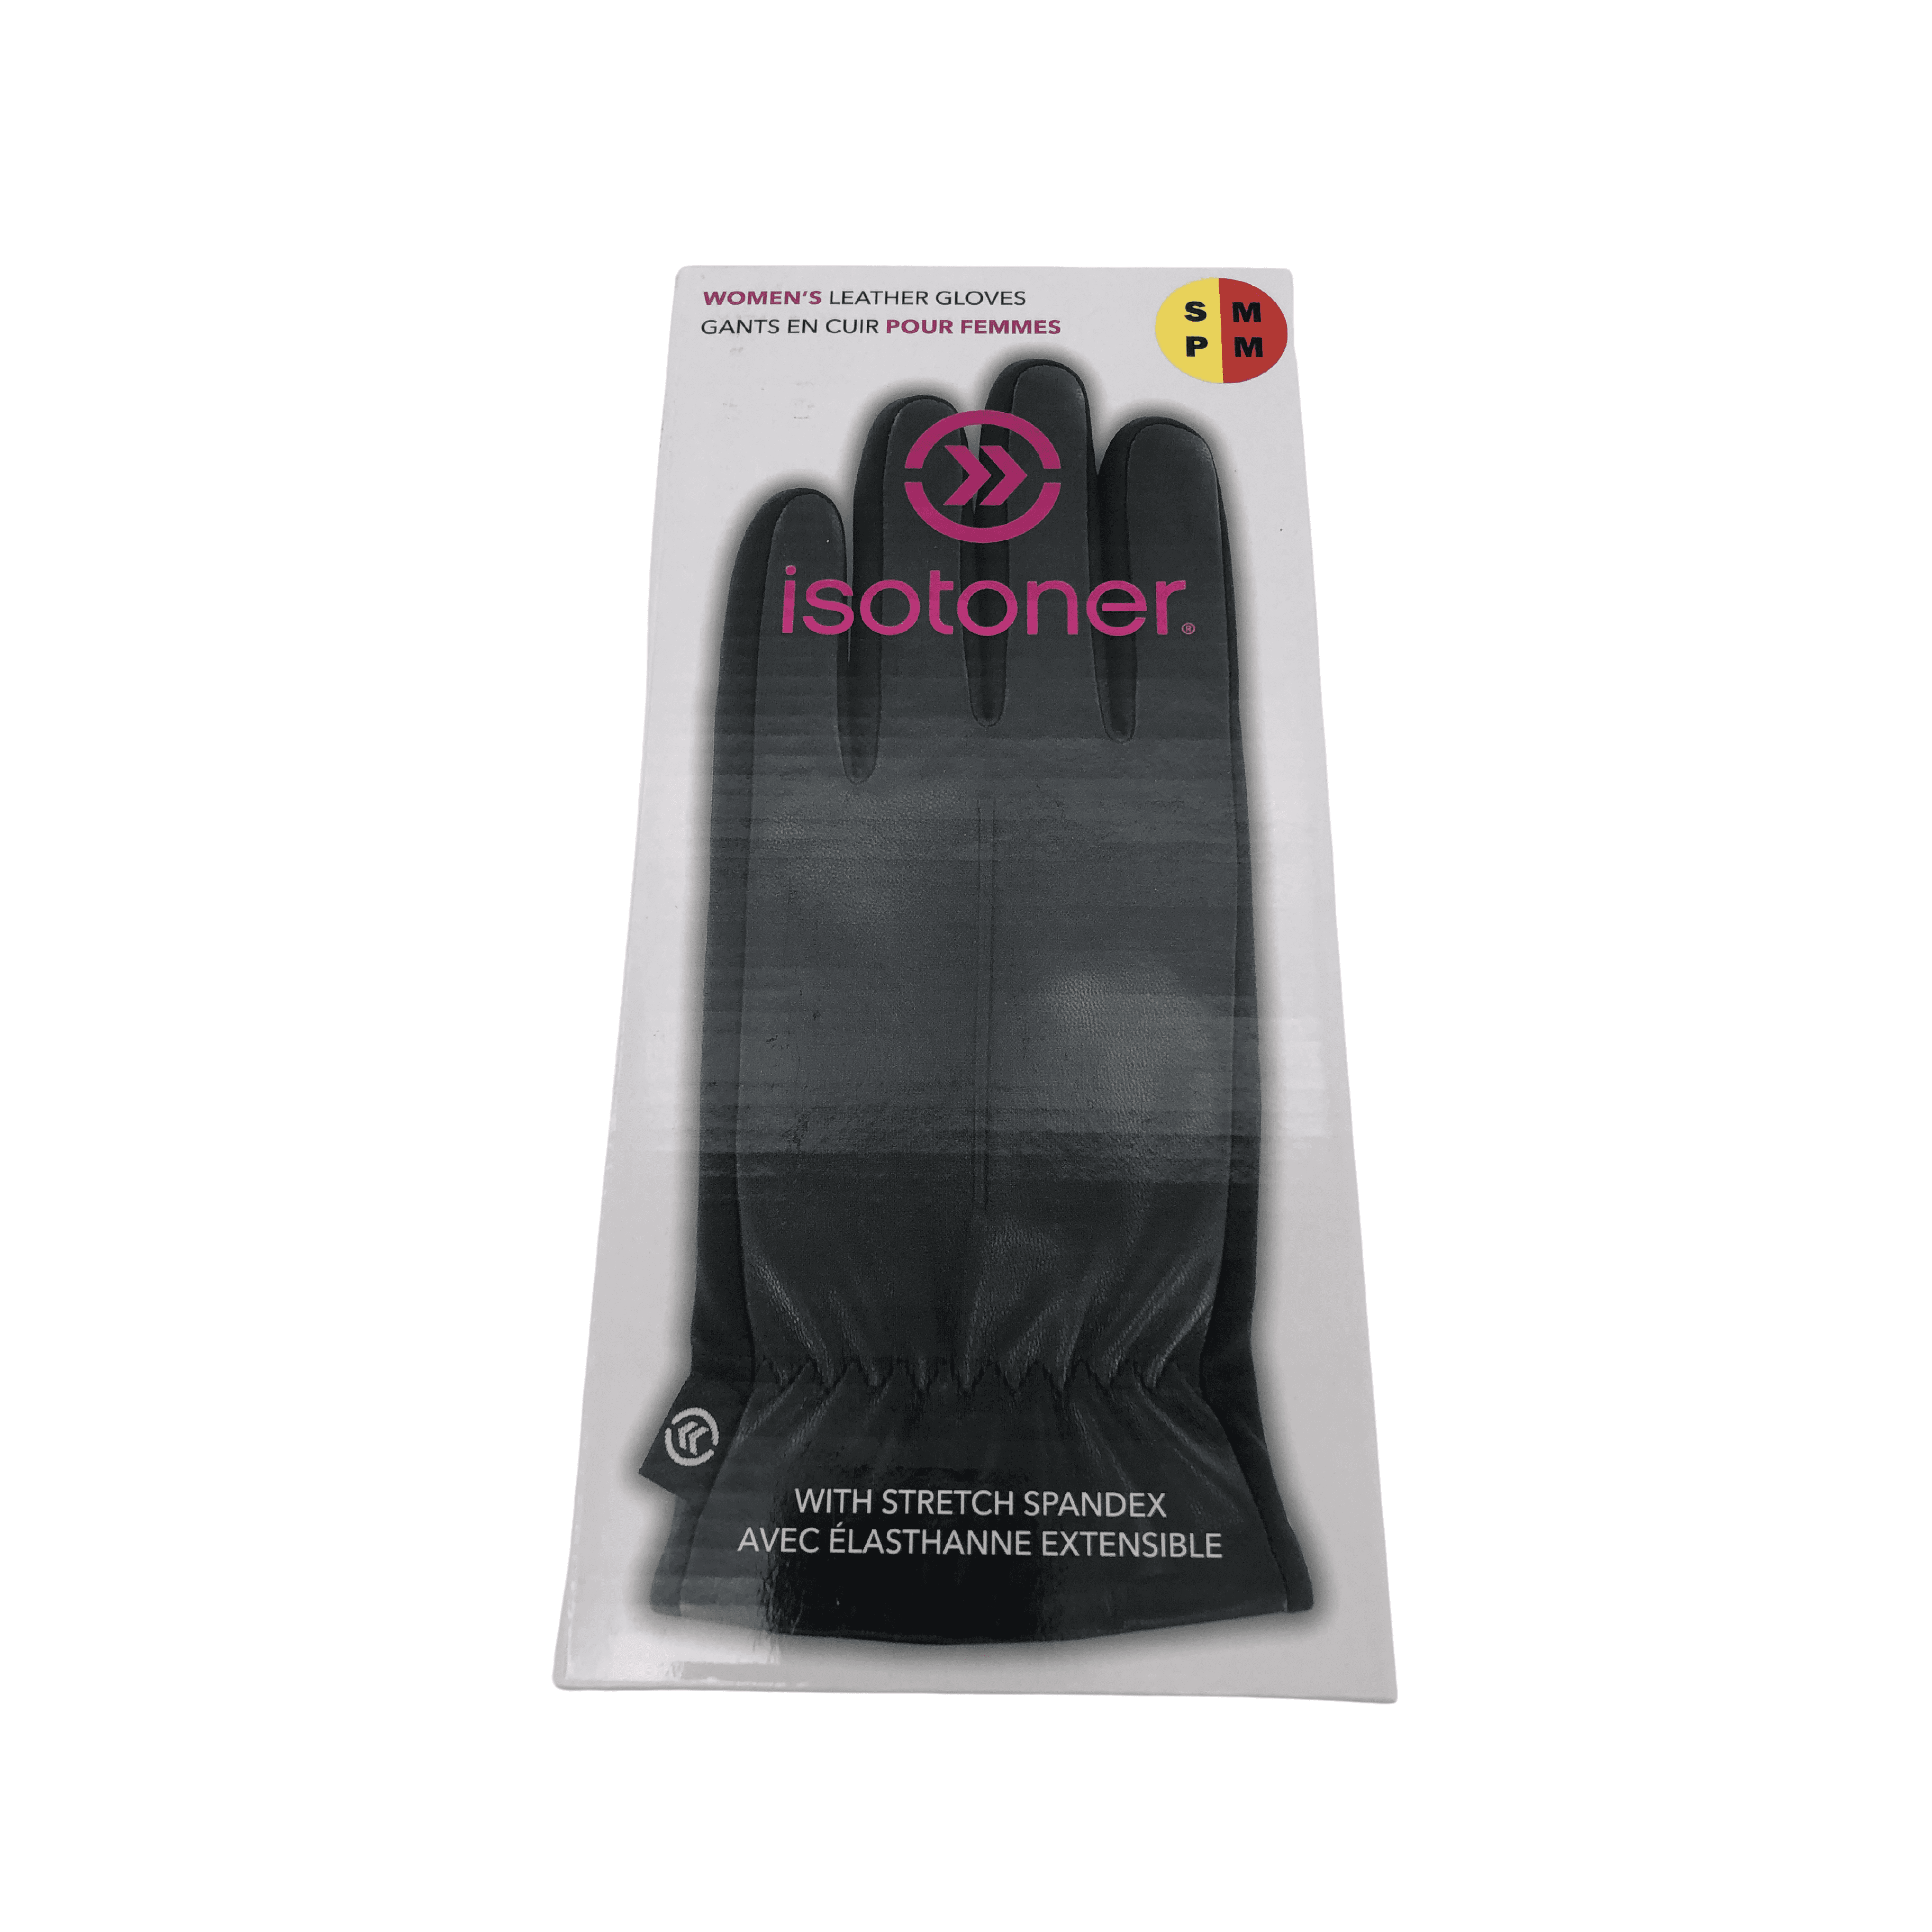 Isotoner Women's leather gloves in size small/Medium